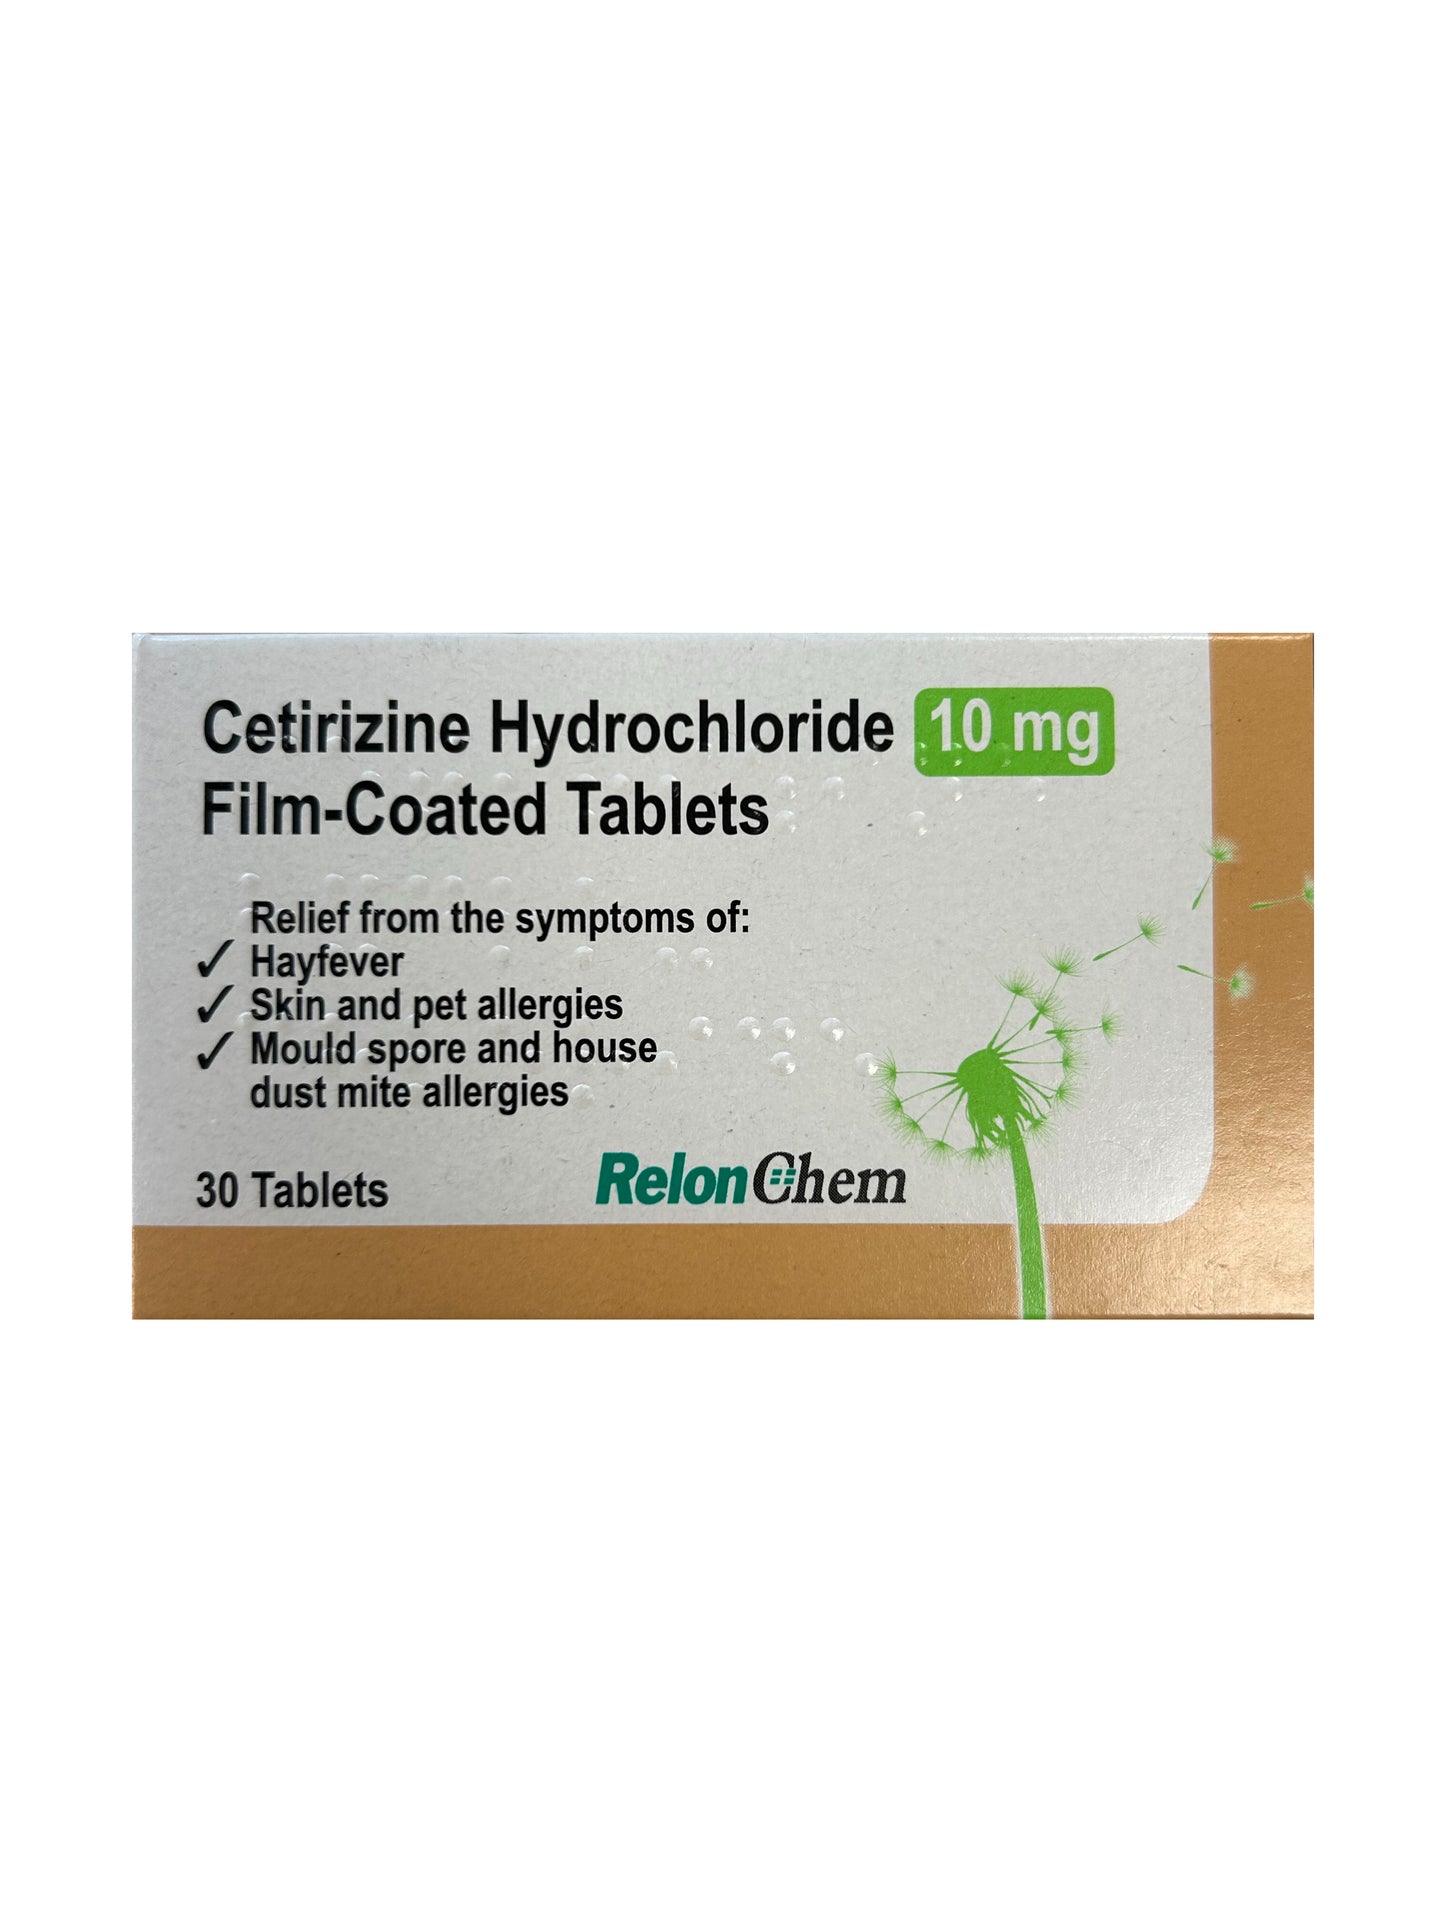 180 Tablets Cetirizine Hydrochloride Film Coated Hayfever & Allergy Relief Tablets (6 Months Supply)